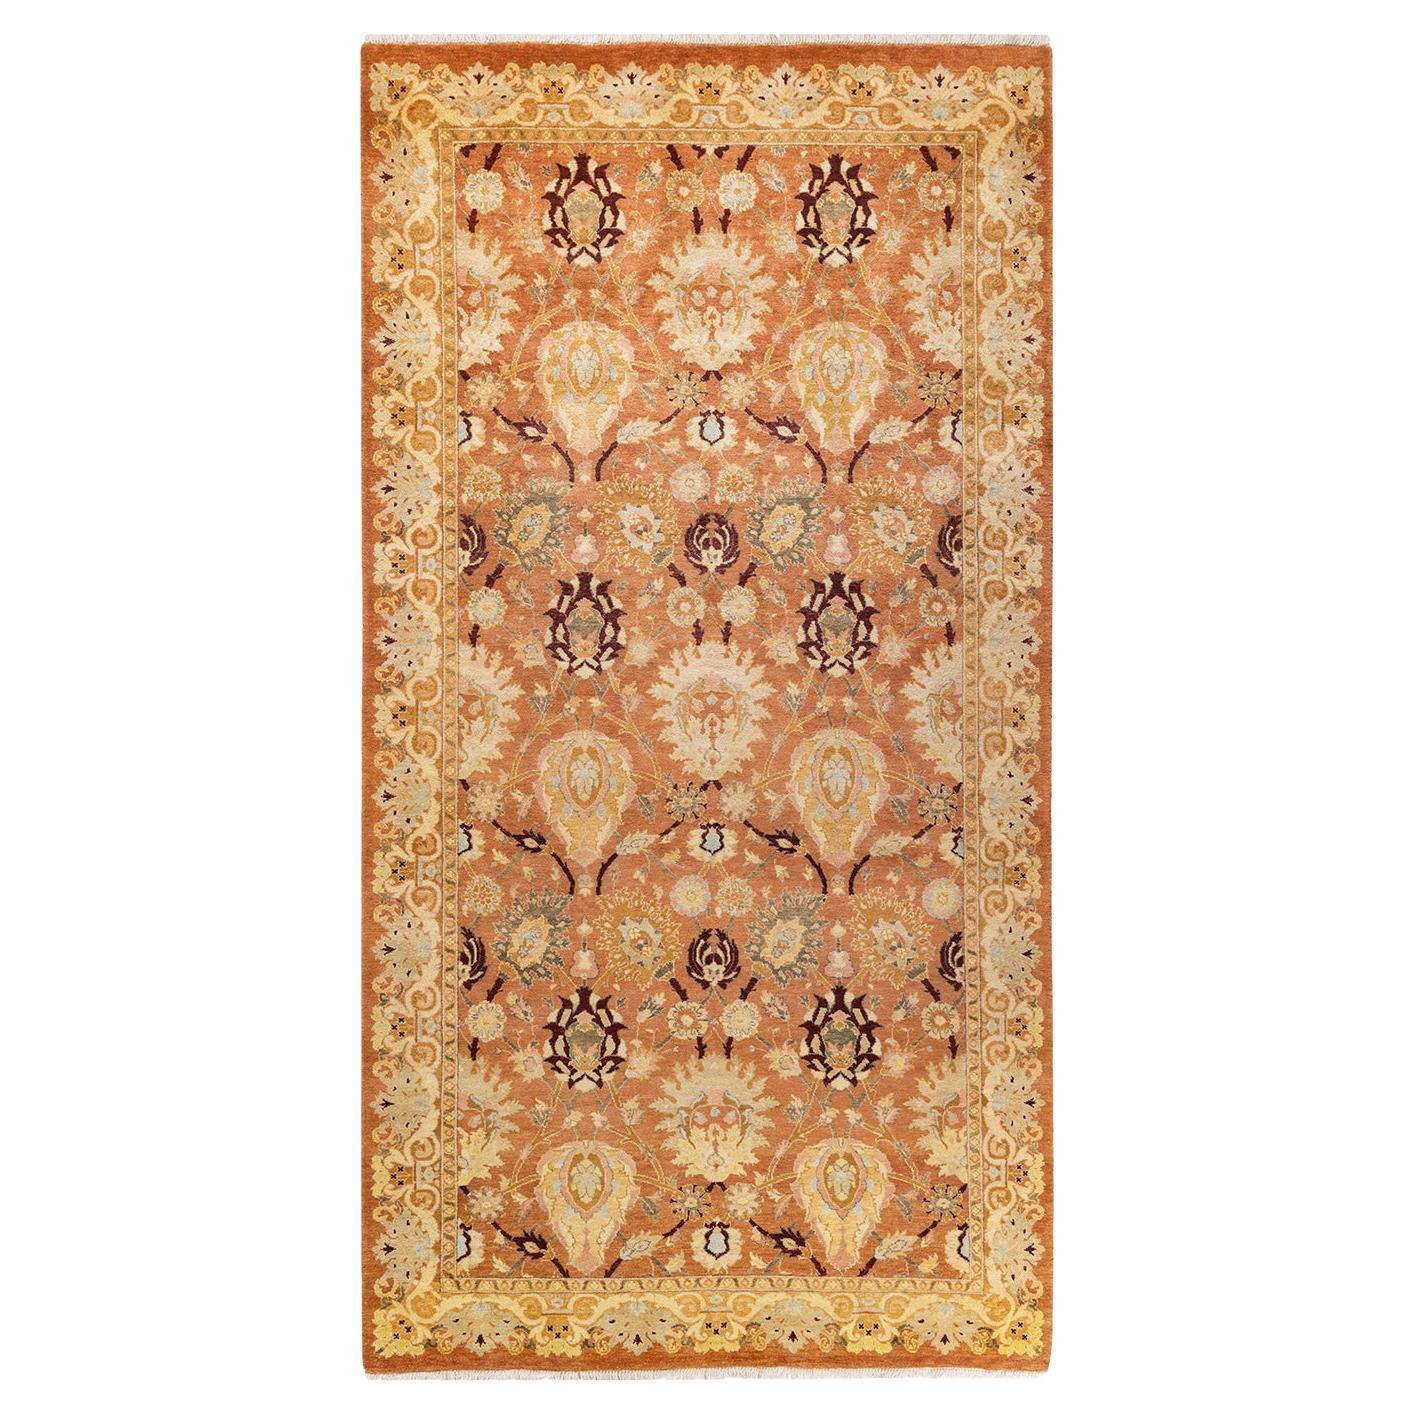 One-of-a-Kind Hand Knotted Floral Eclectic Brown Area Rug